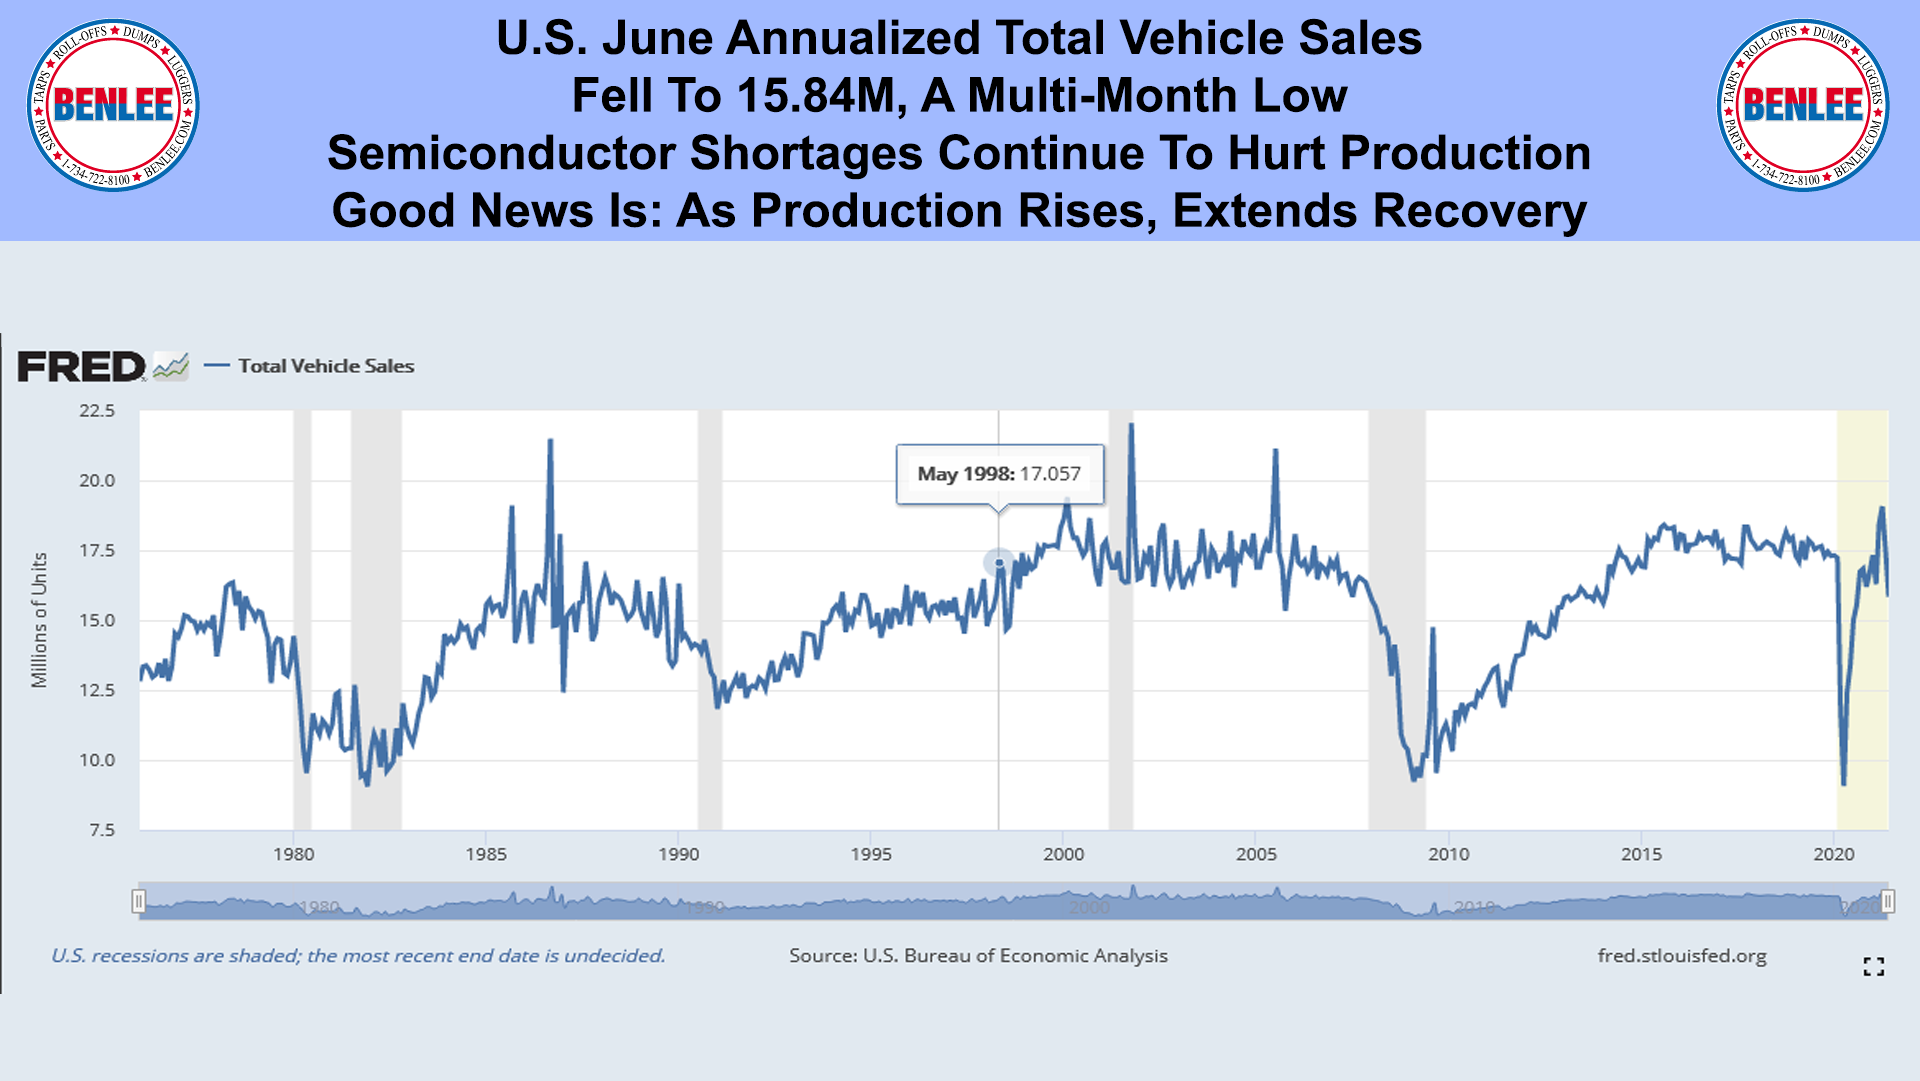 U.S. June Annualized Total Vehicle Sales